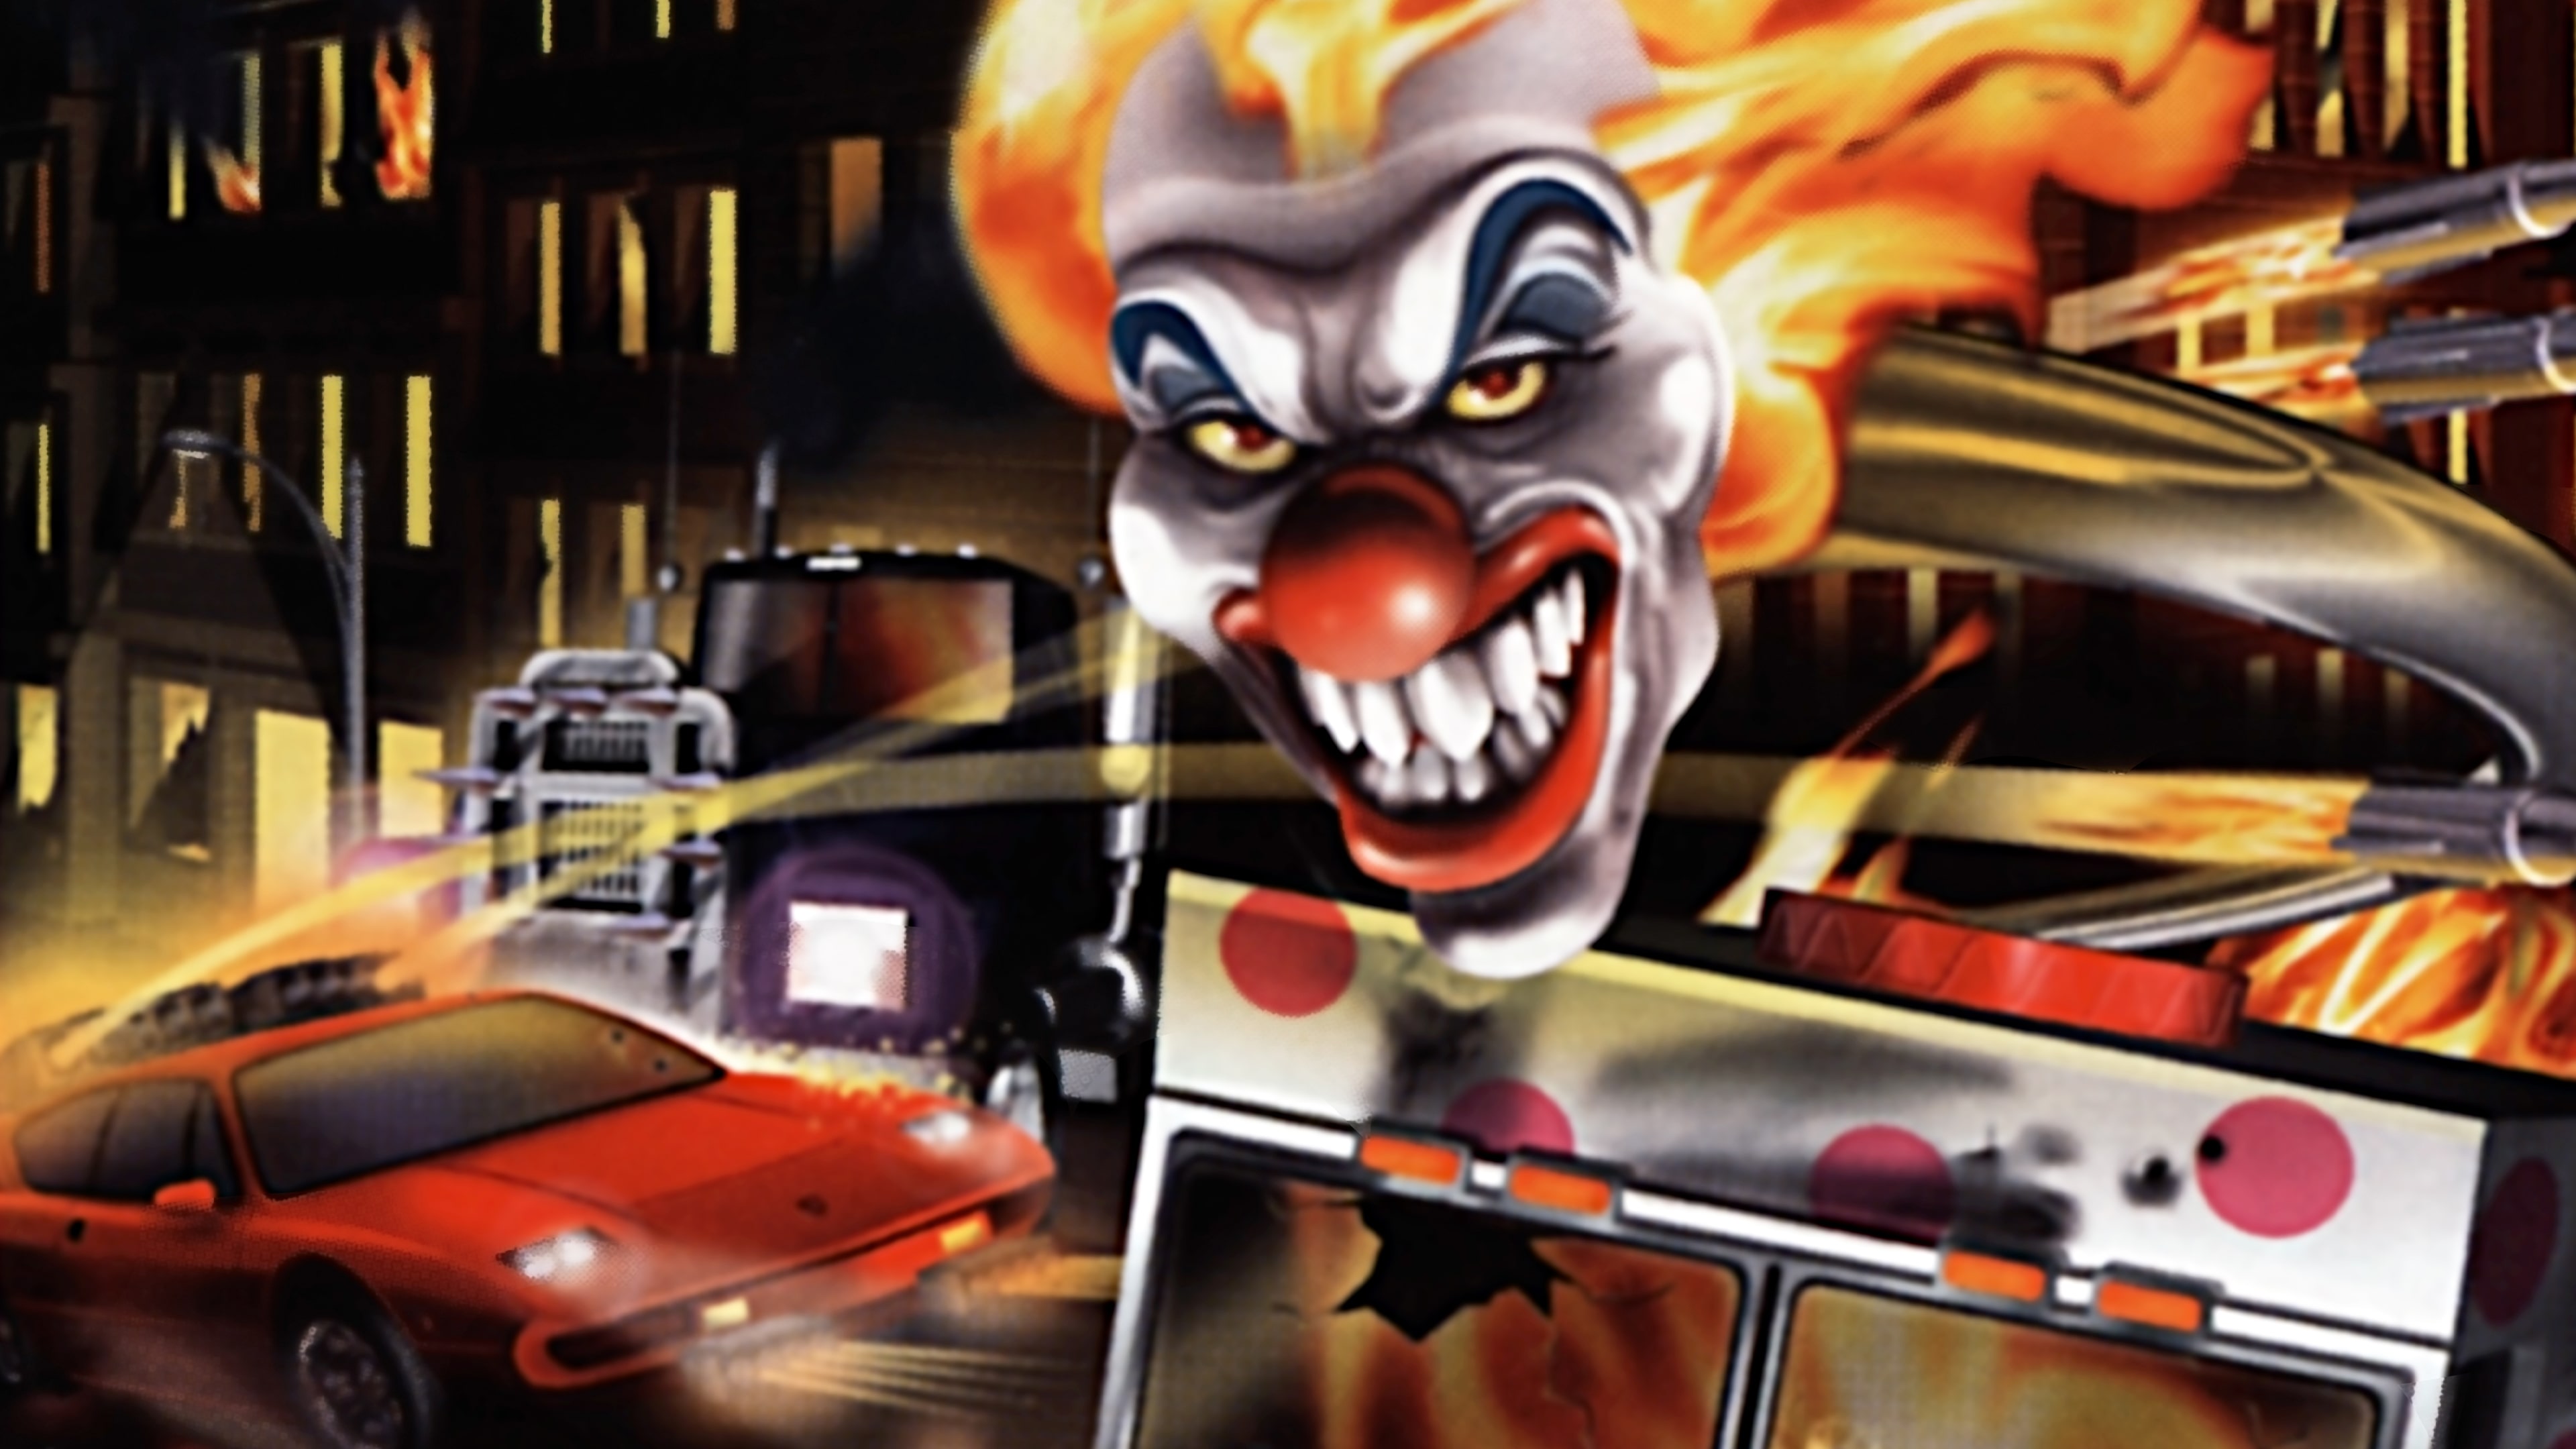 Twisted Metal -- Gameplay (PS1) 